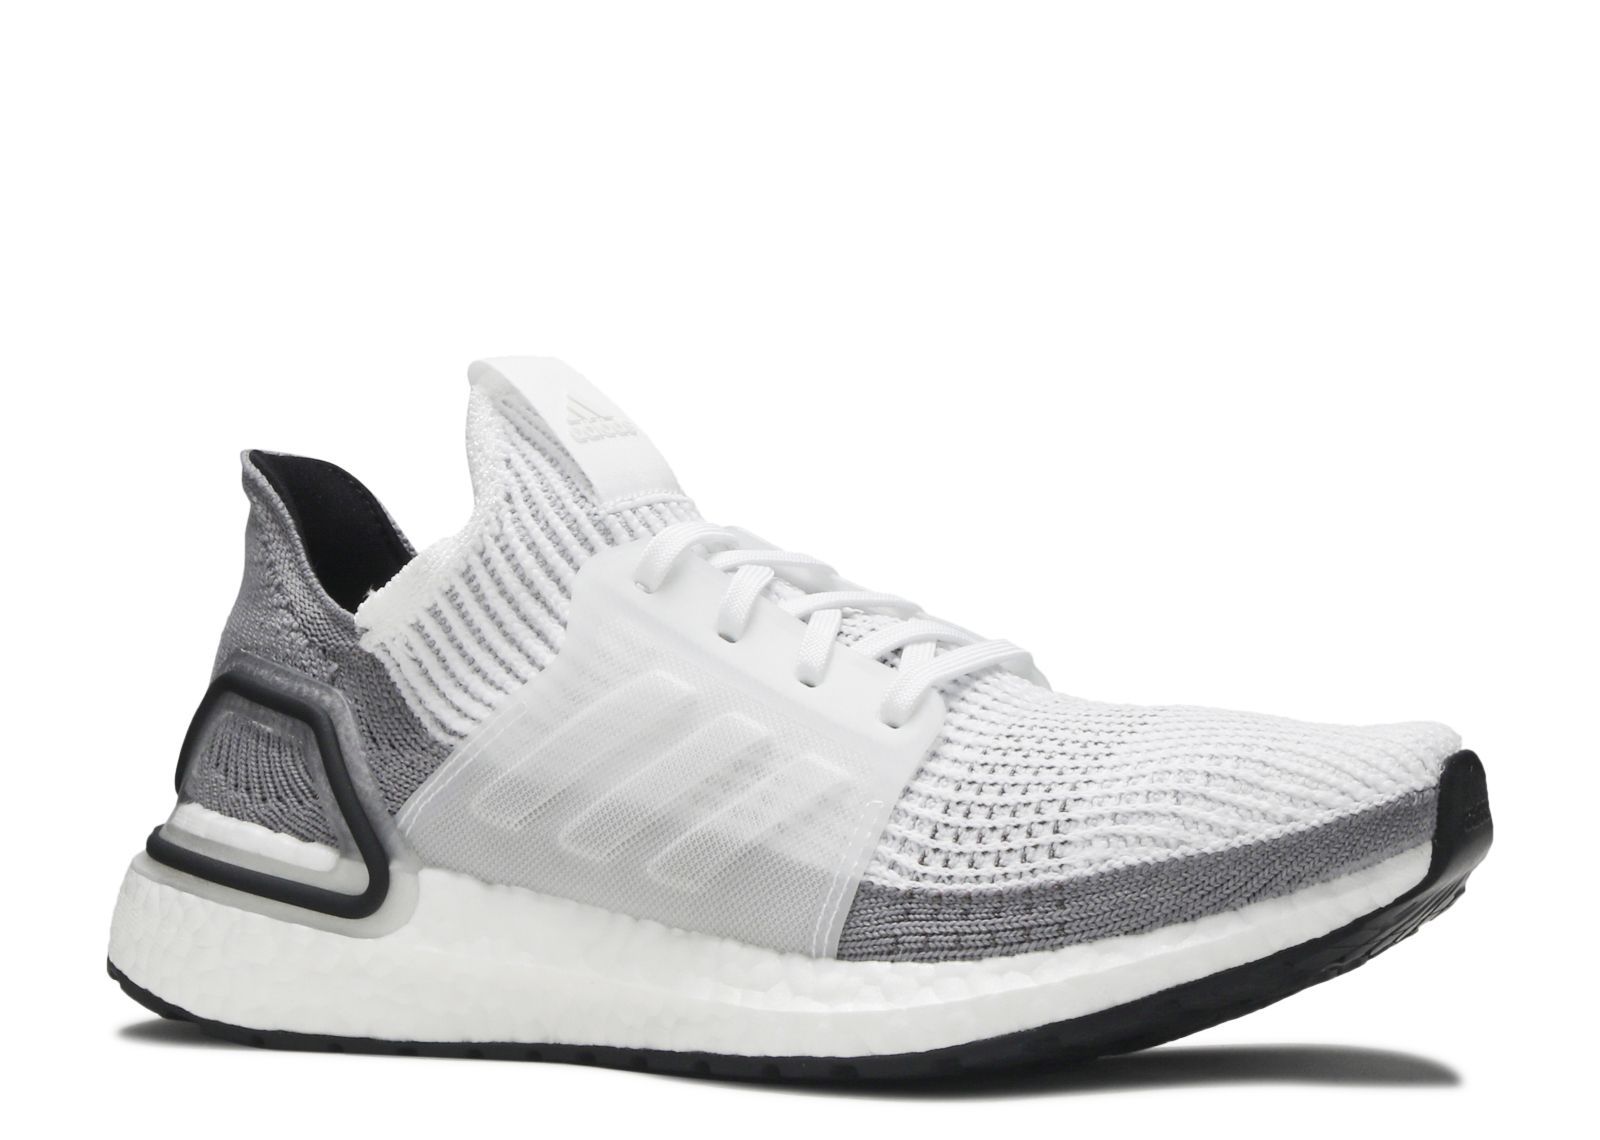 dilemma Forfærdeligt Kong Lear Wmns UltraBoost 19 'Grey White' - Adidas - B75880 - cloud white/crystal  white/grey two | Flight Club